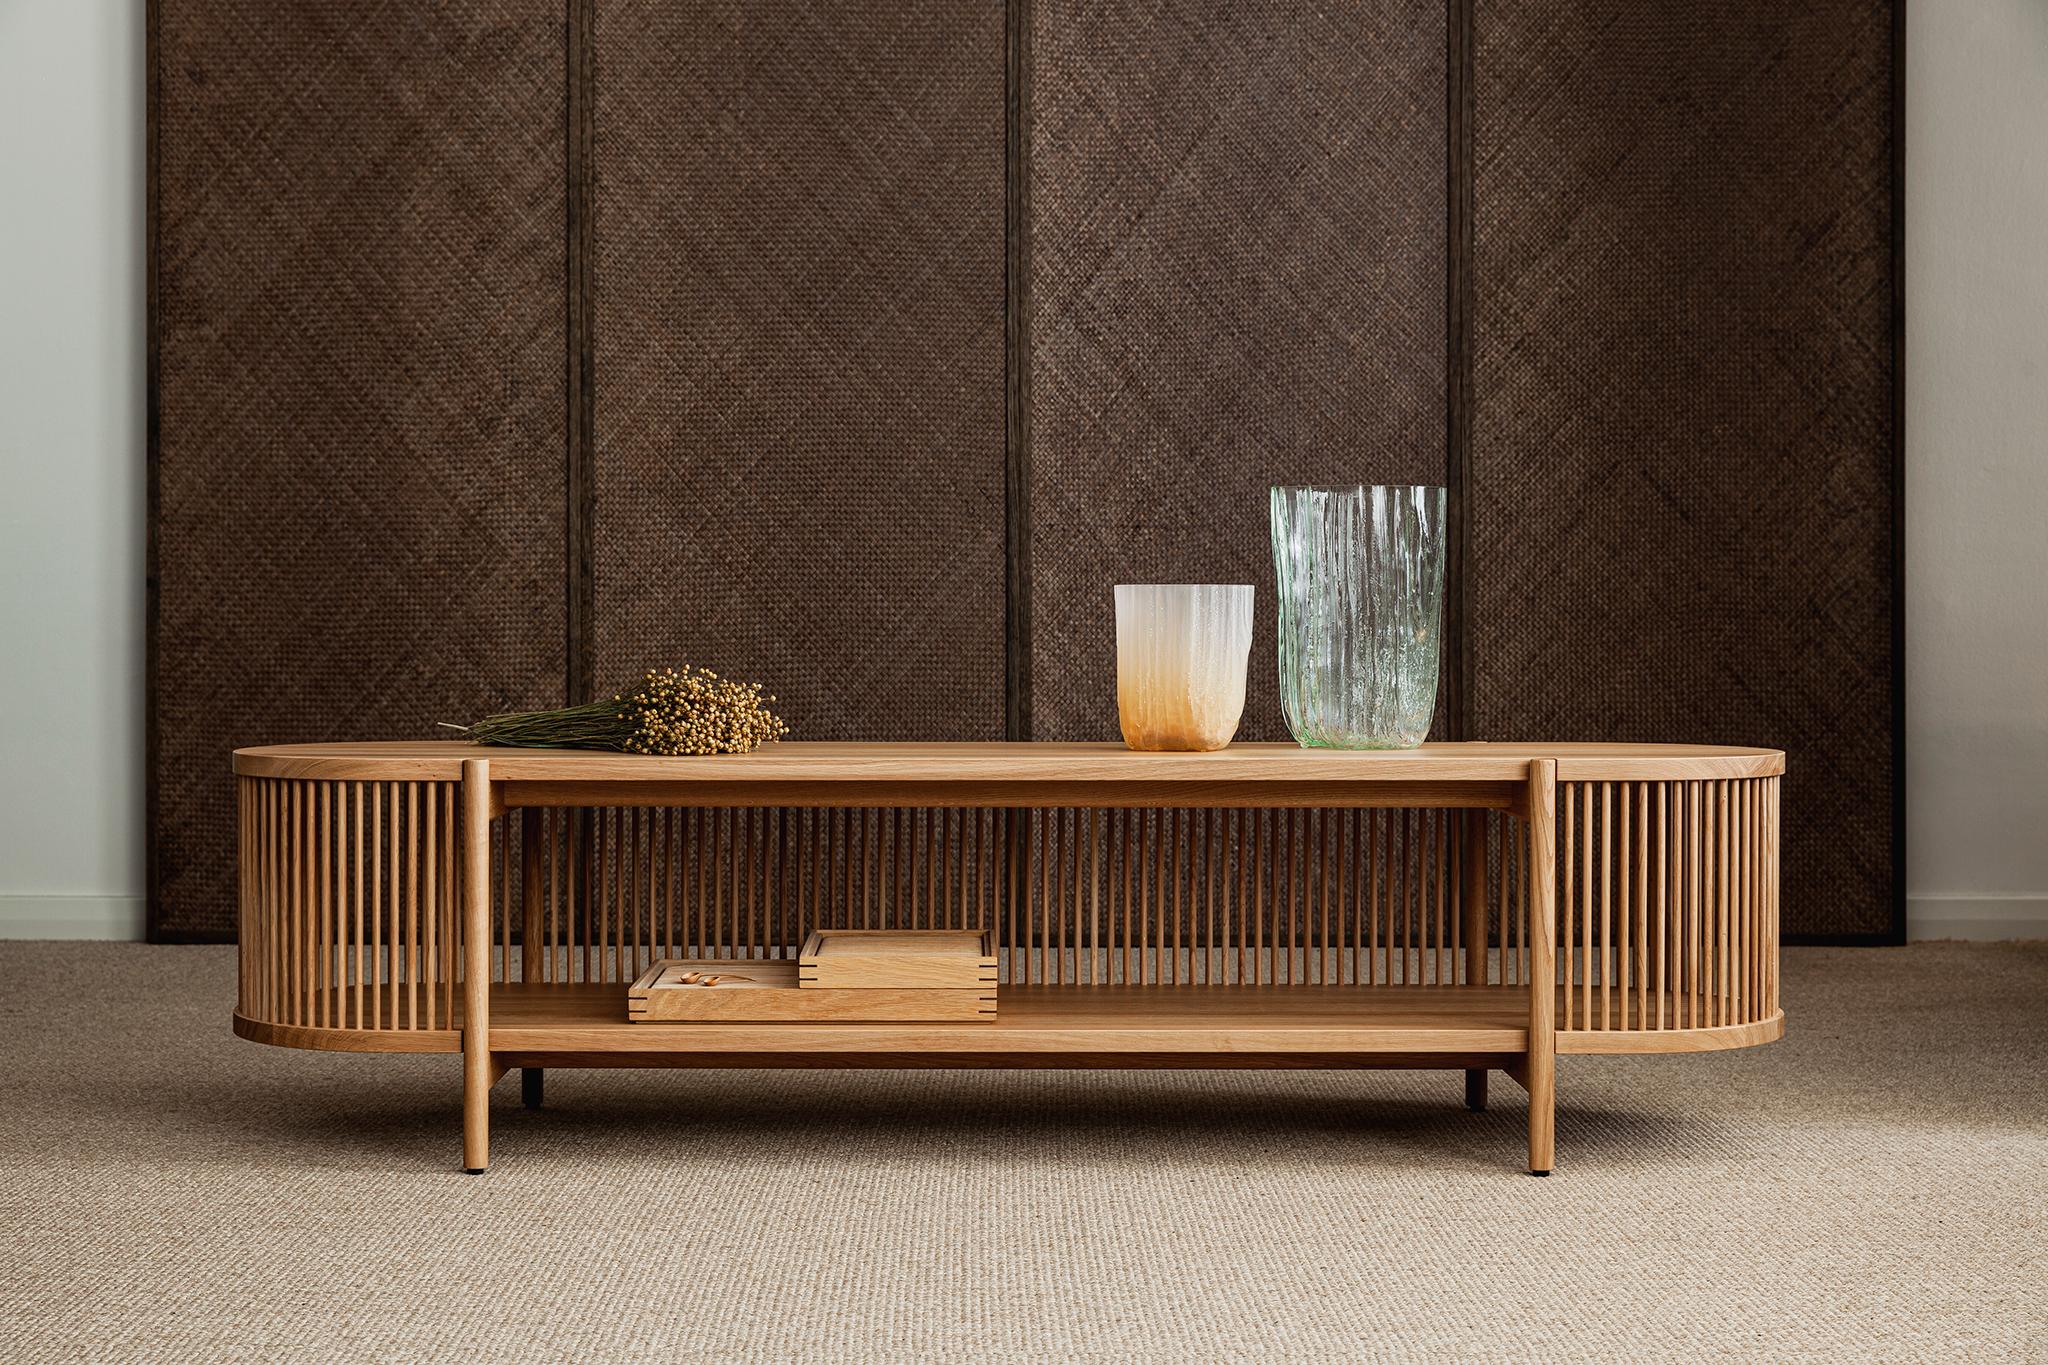 Low sideboard Bastone // Oak 
Designed by Antrei Hartikainen, 2022

Dimensions : H. 50 cm / W. 200 cm / D. 53 cm

Model shown in the picture : 
- Color : Oak 
- Without doors

Designed by the award-winning master cabinet maker and designer